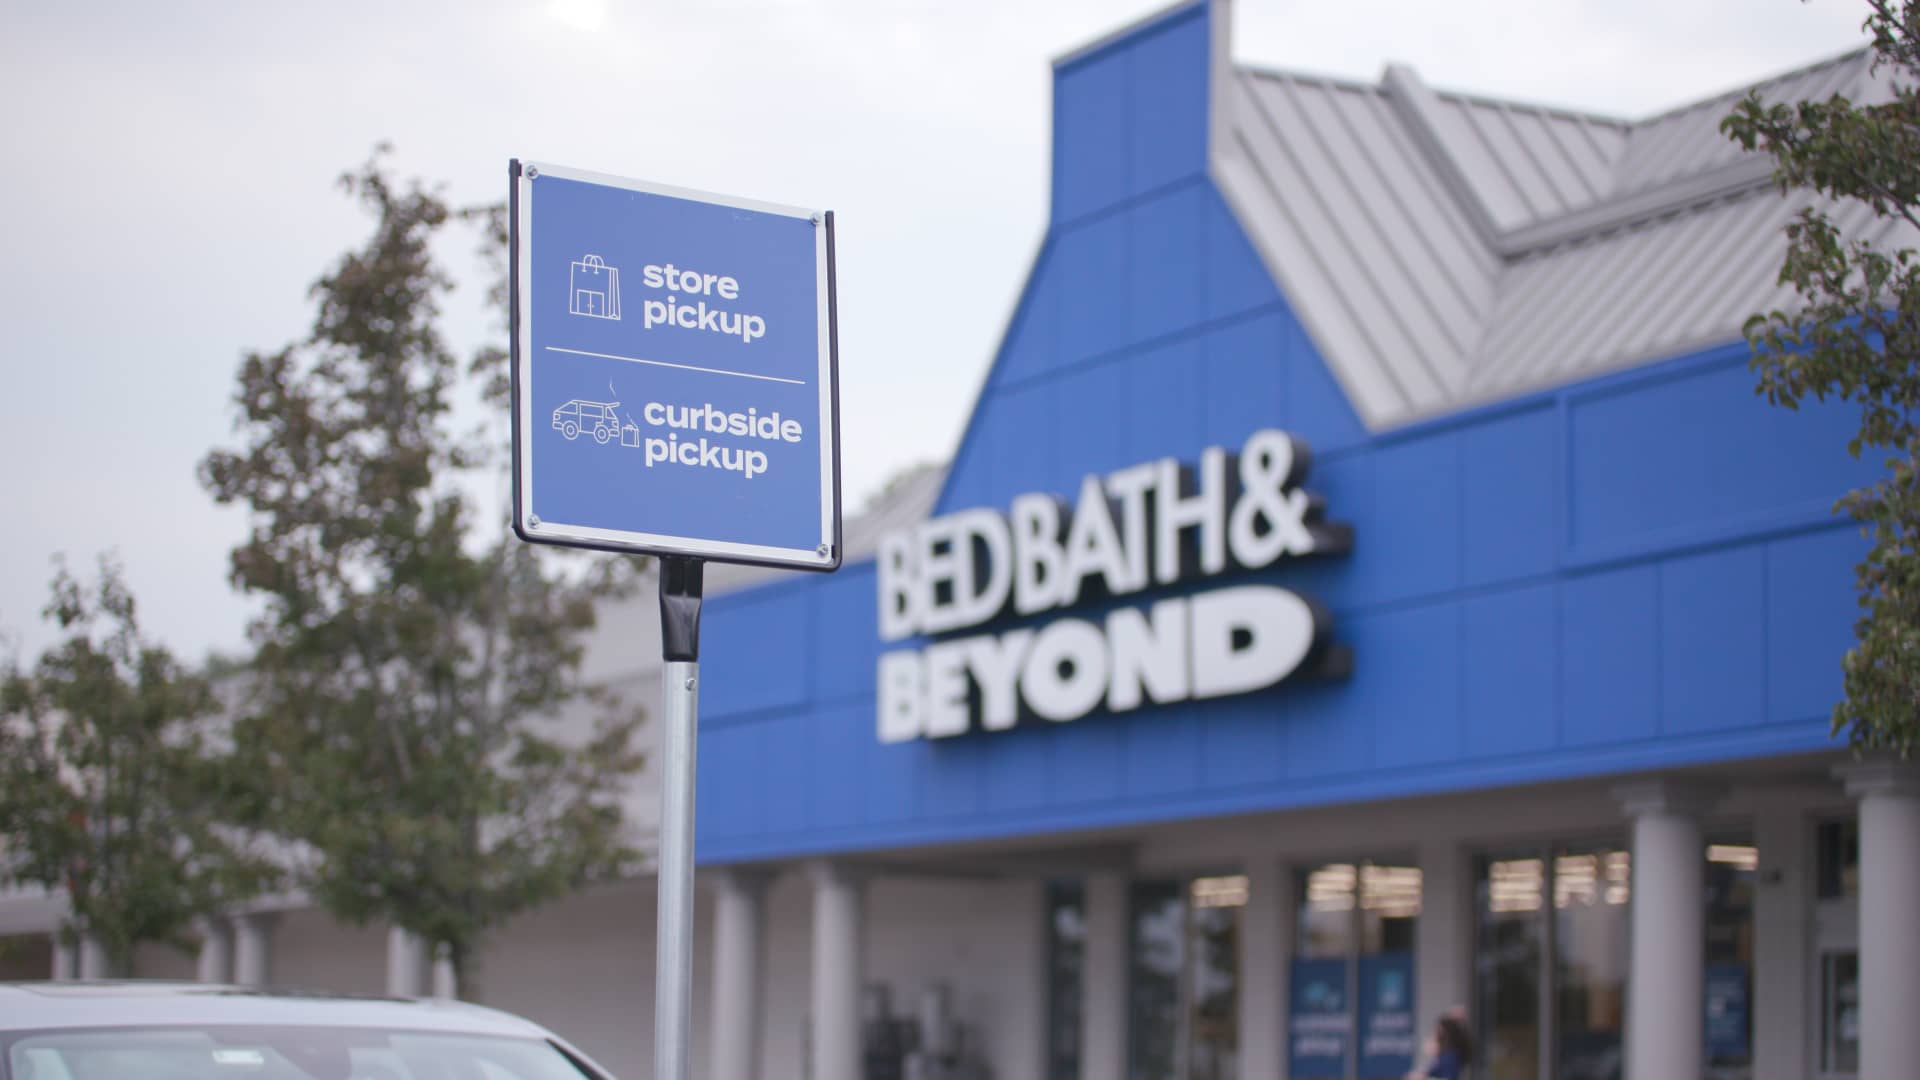 Bed Bath & Beyond (BBBY) Reports Loss of 3rd Quarter 2020 Earnings